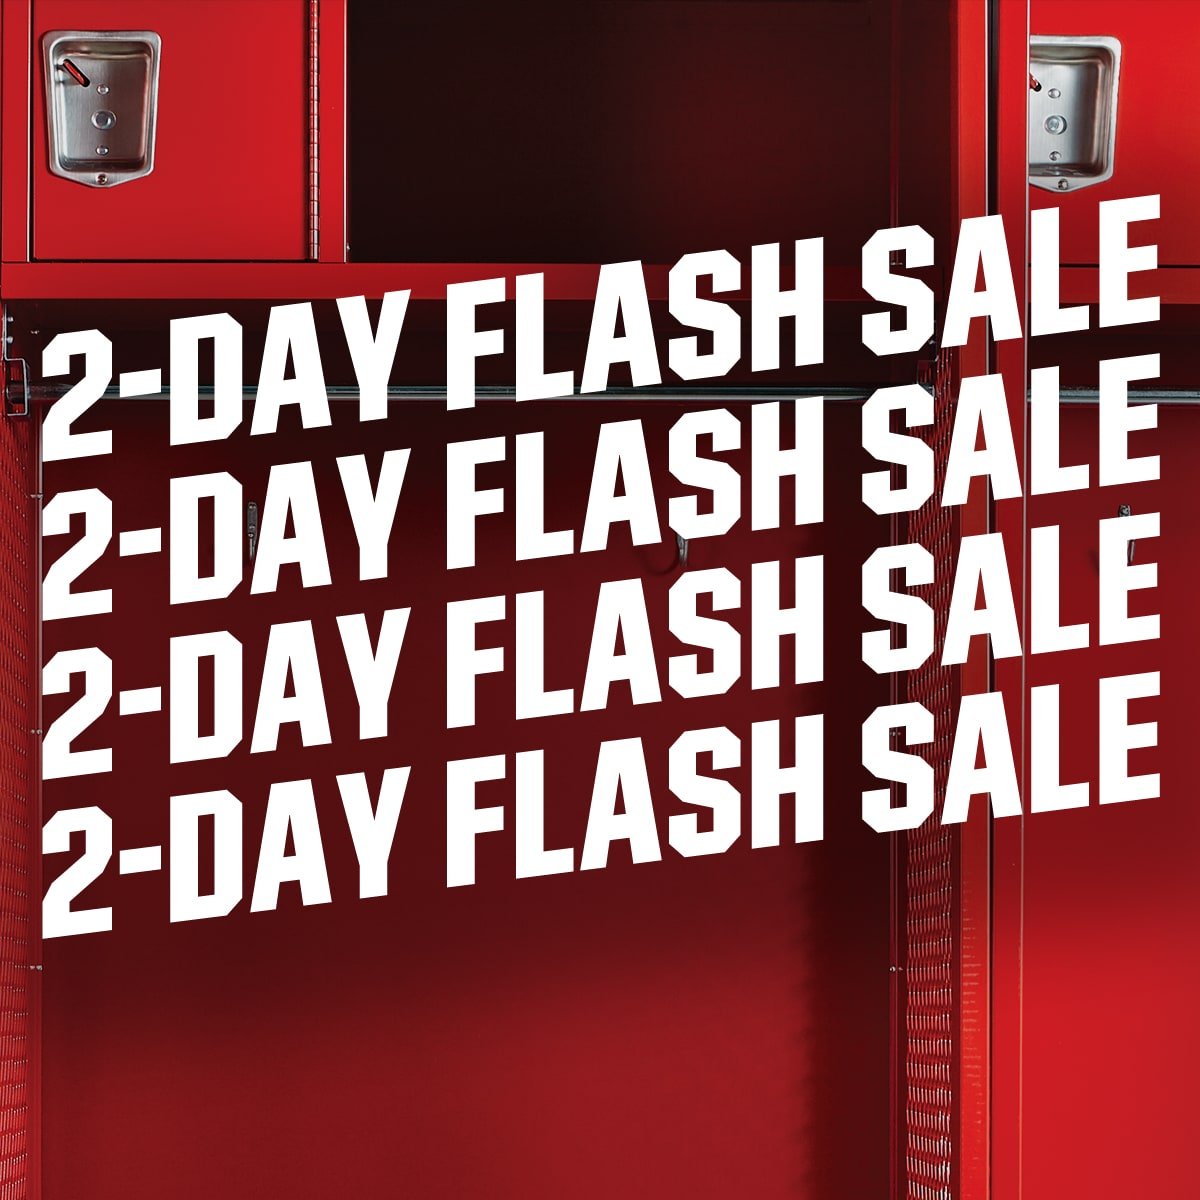 Two day flash sale.